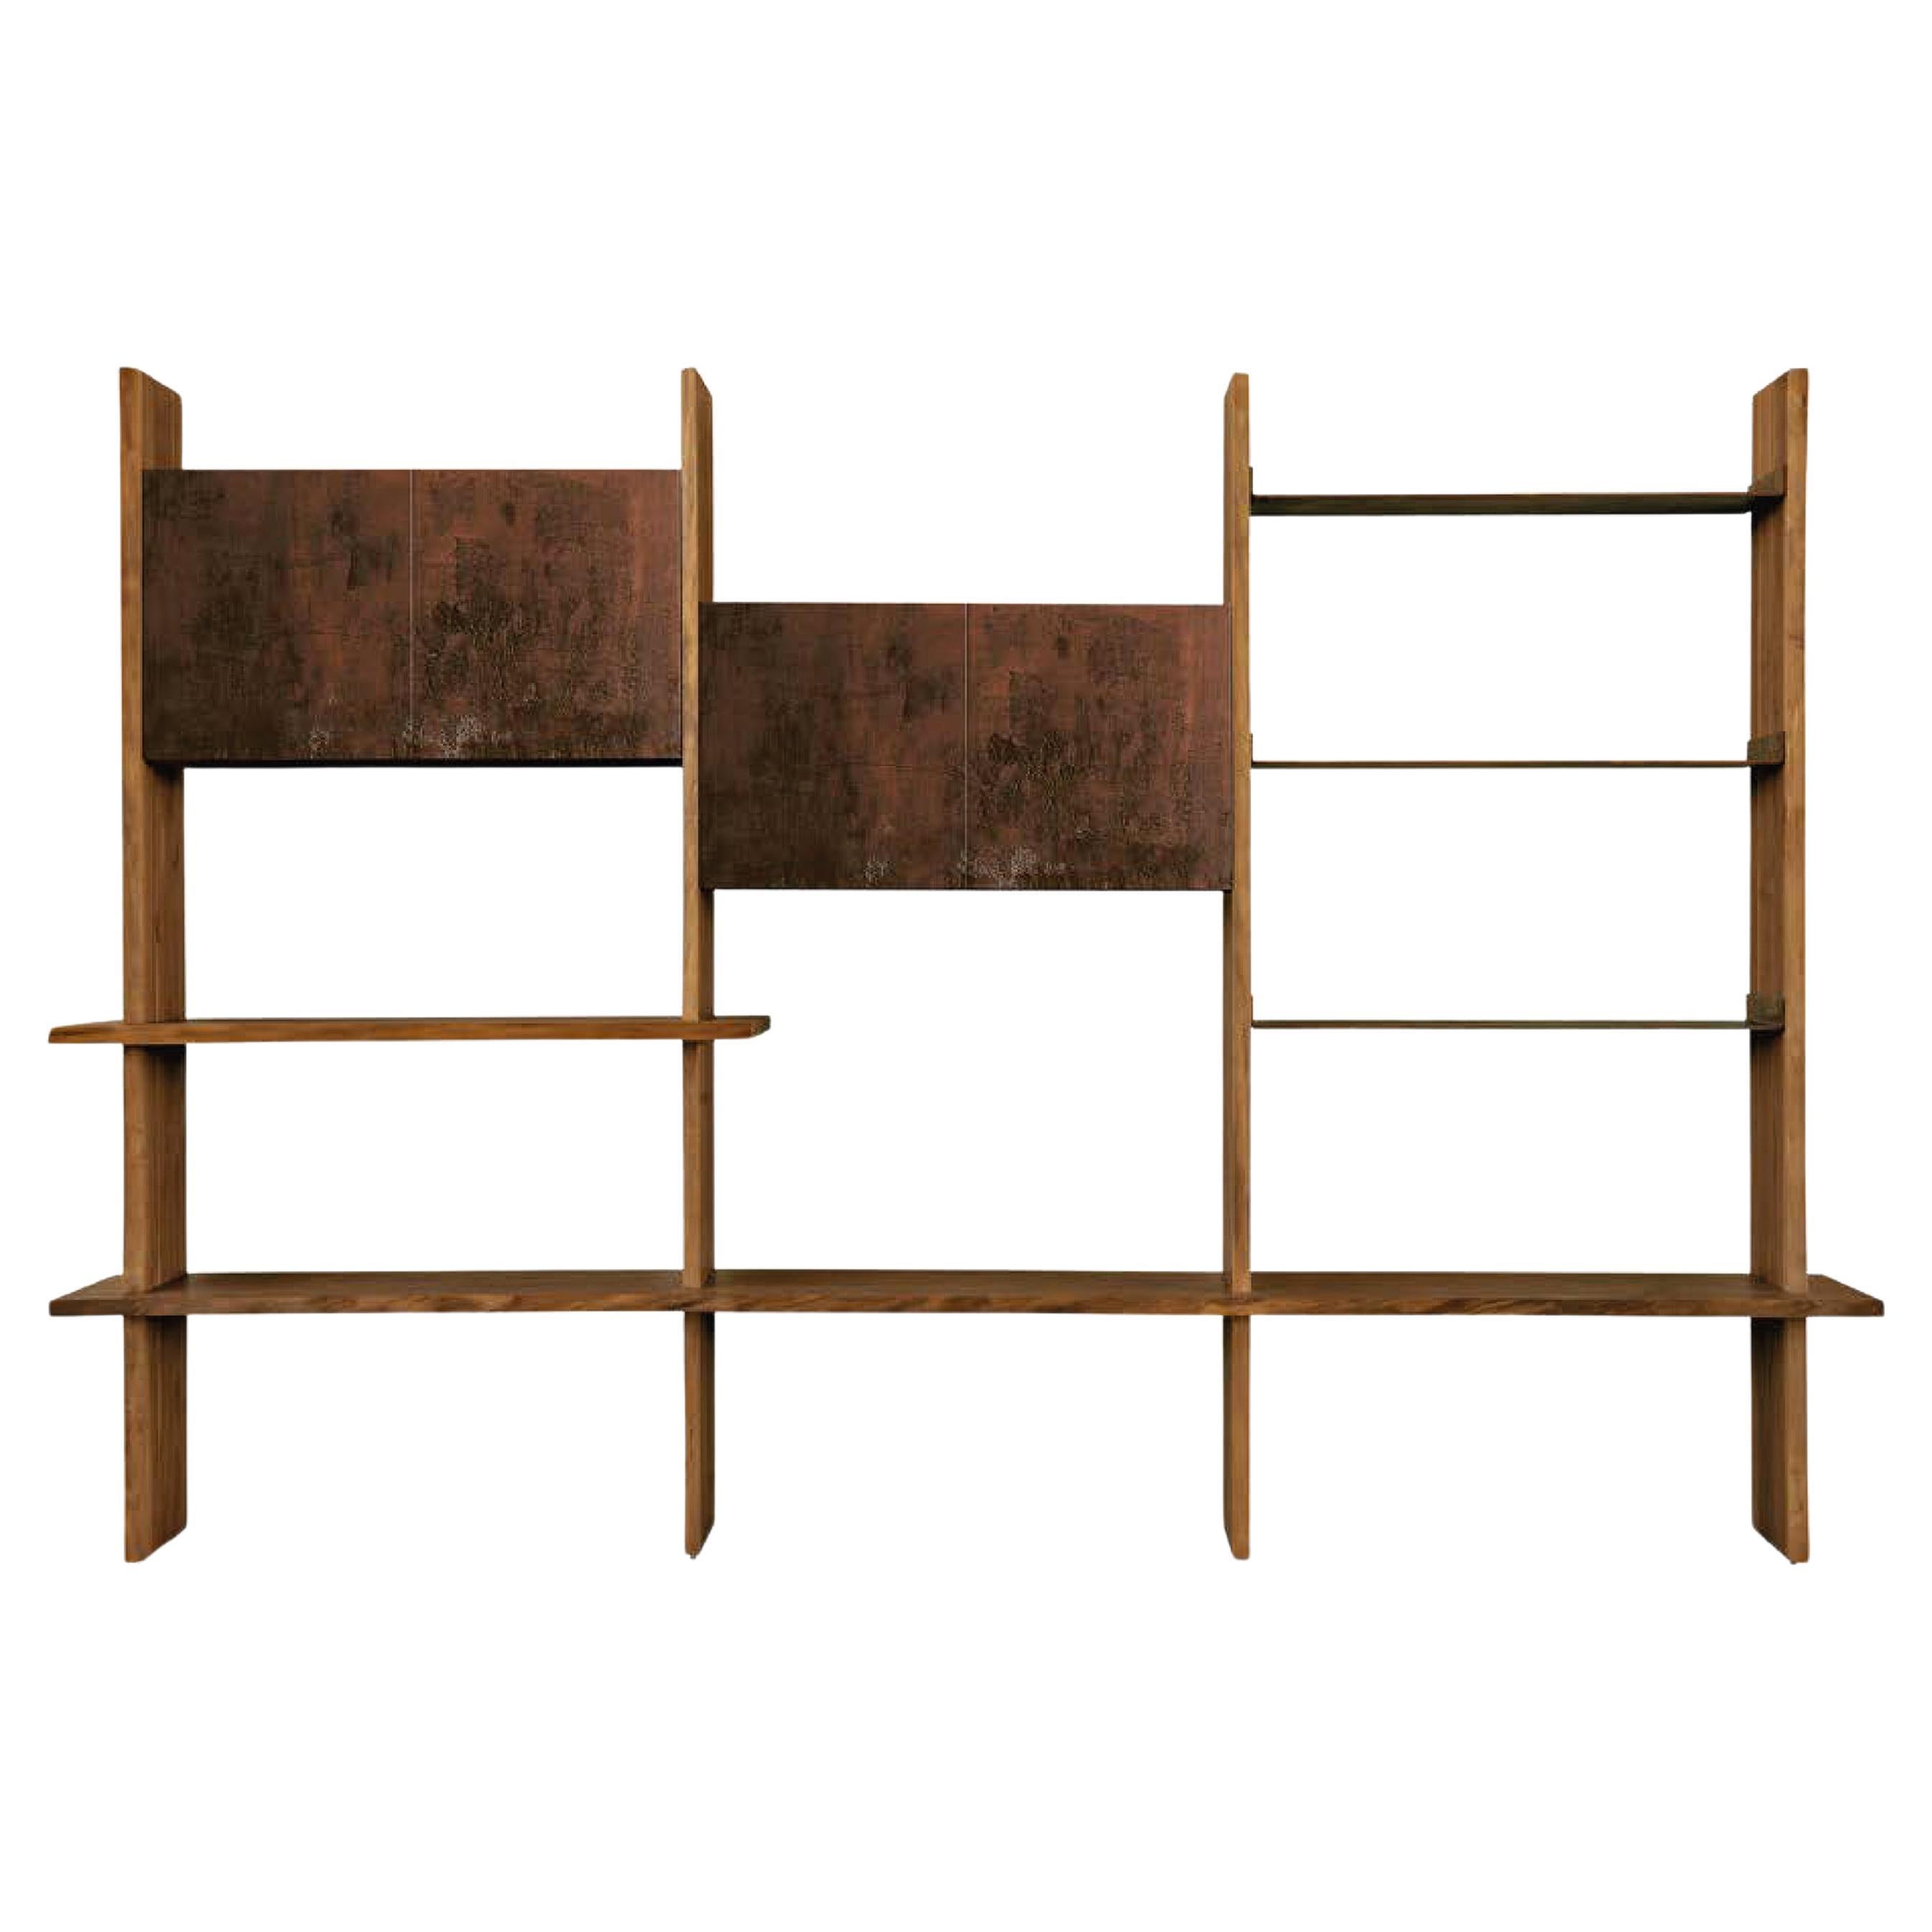 Capanna Solid Wood Library, Walnut in Hand-Made Natural Finish, Contemporary For Sale